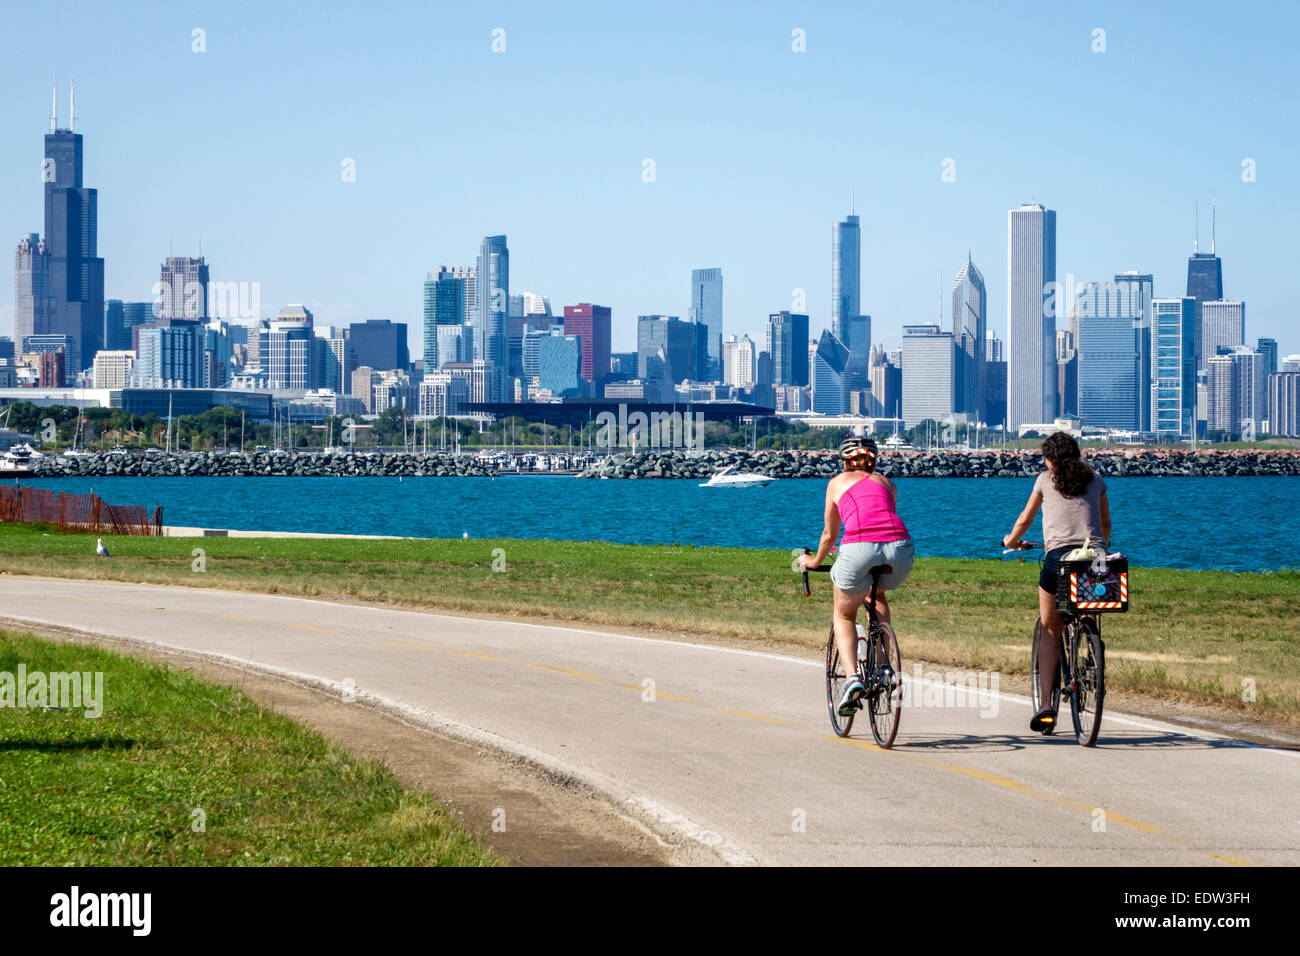 Chicago Illinois,South Side,Lake Michigan,39th Street Beach,Lakefront Trail,donna donna donna donna donna donne,amici,ciclisti ciclisti bicicletta, ciclismo Foto Stock